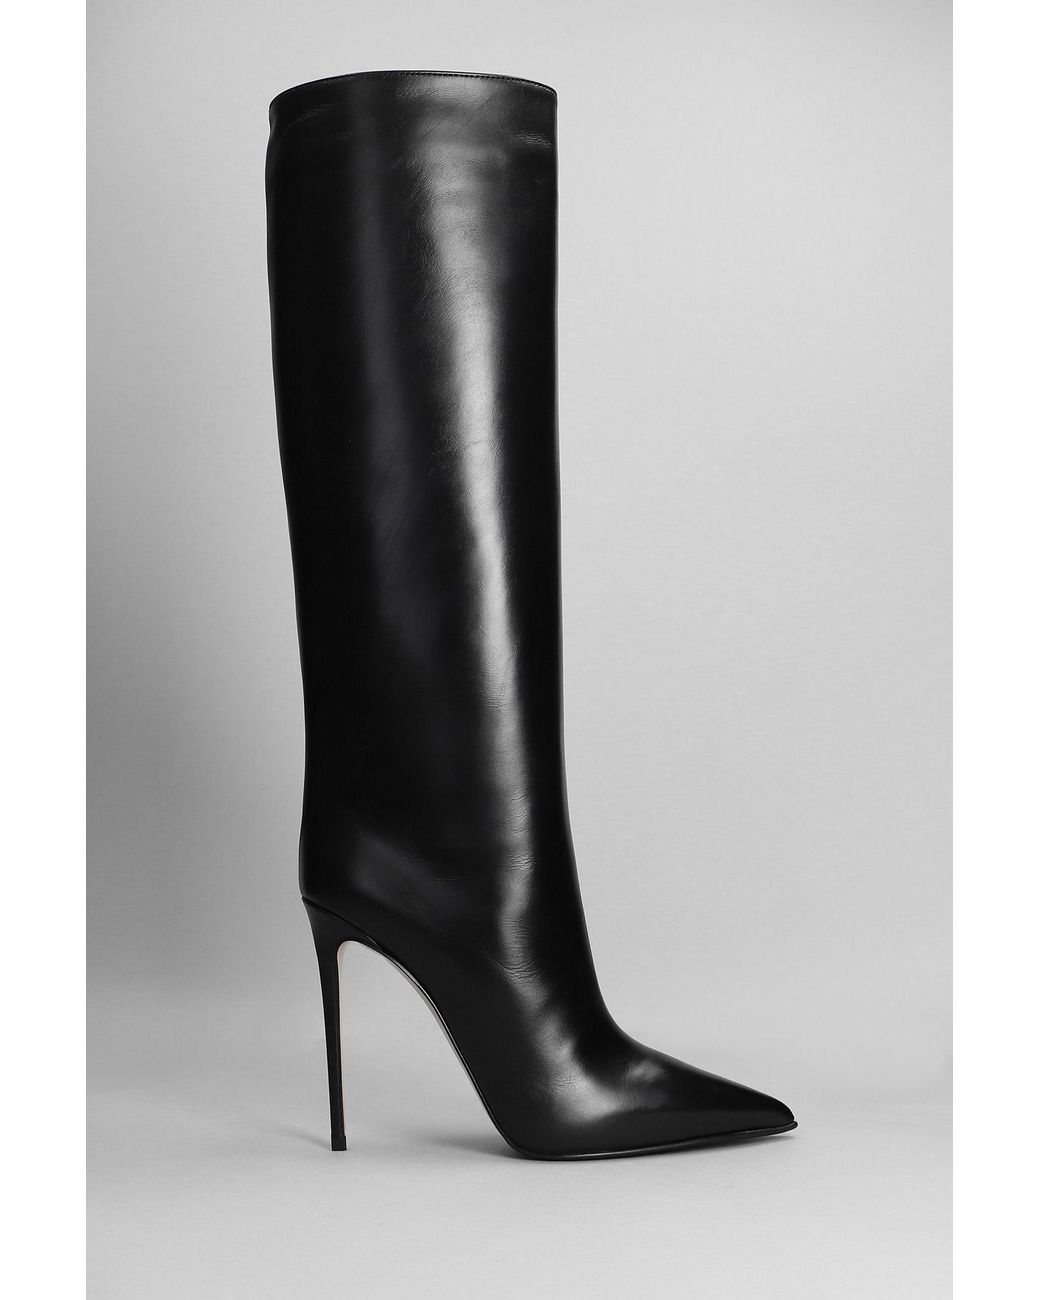 Le Silla Eva 120 High Heels Boots In Black Leather | Lyst